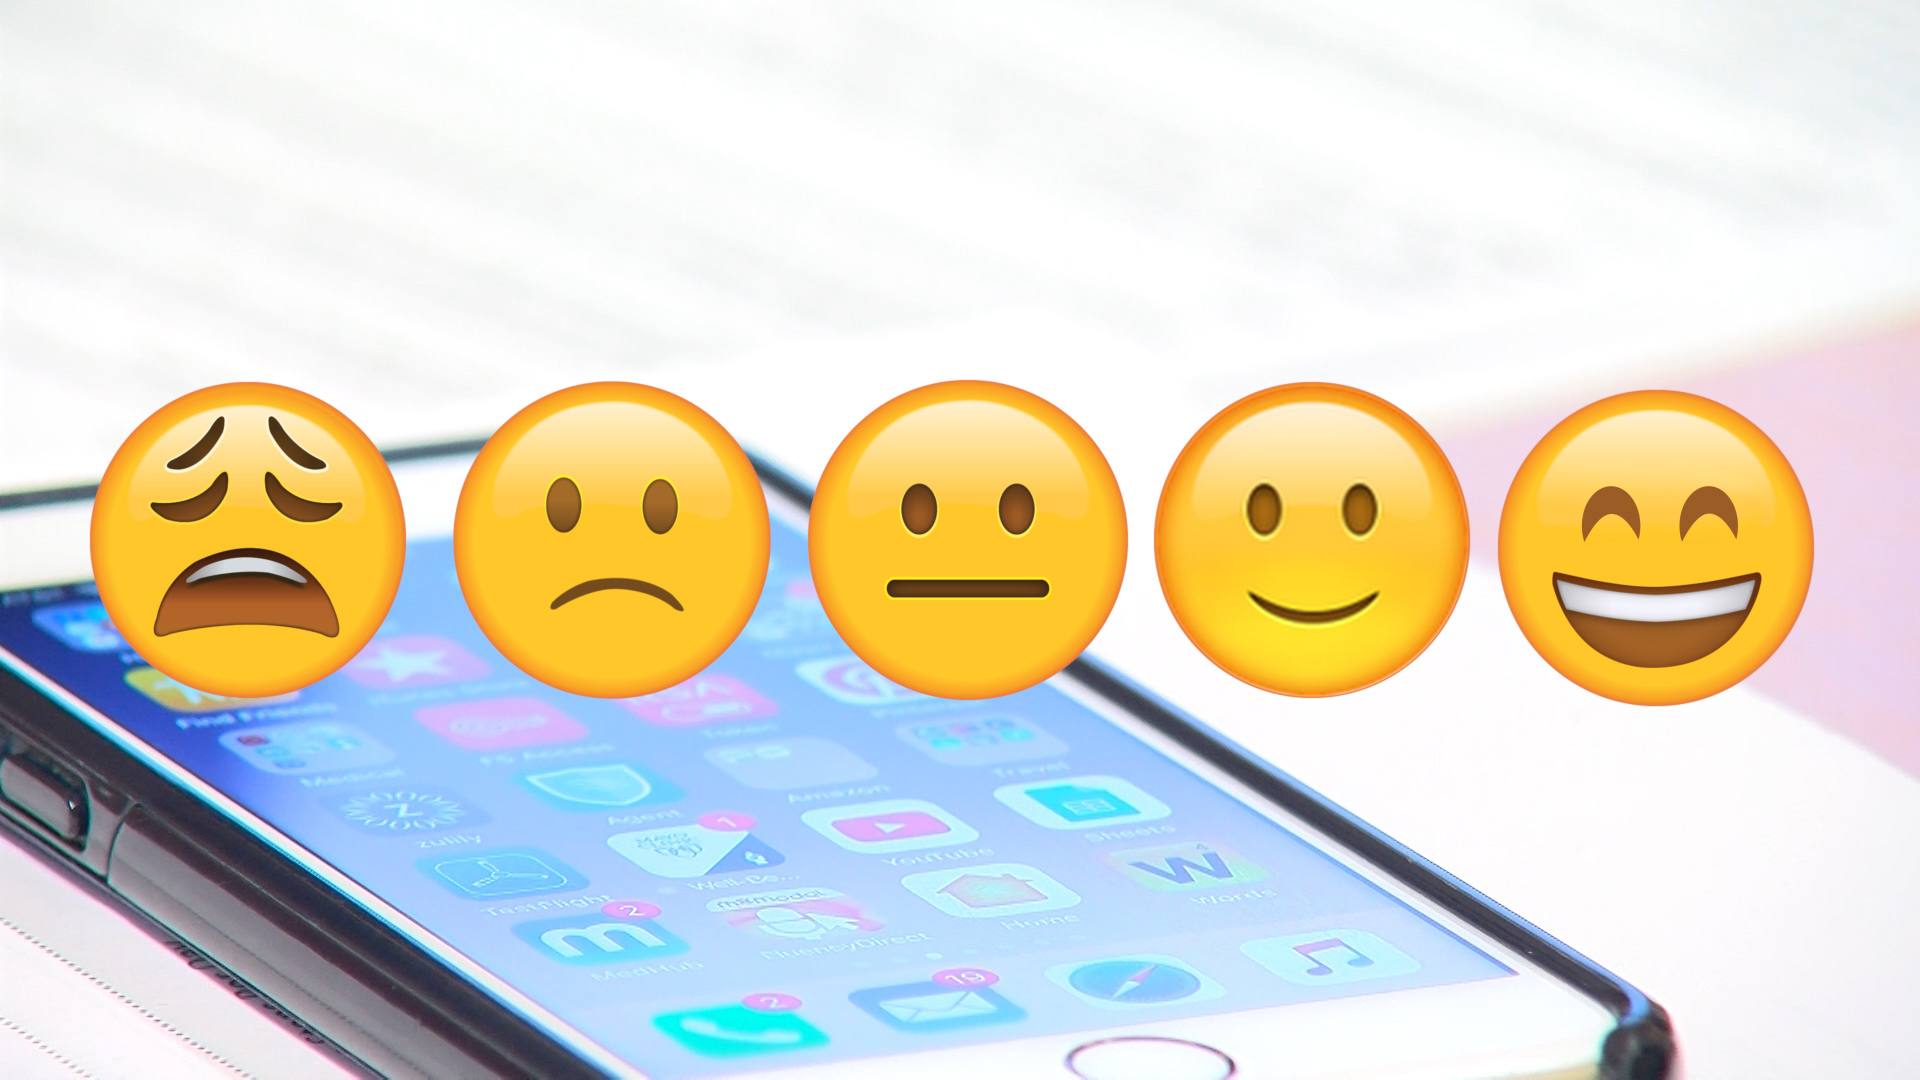 A screen shot of five emojis with a cell phone in the background.